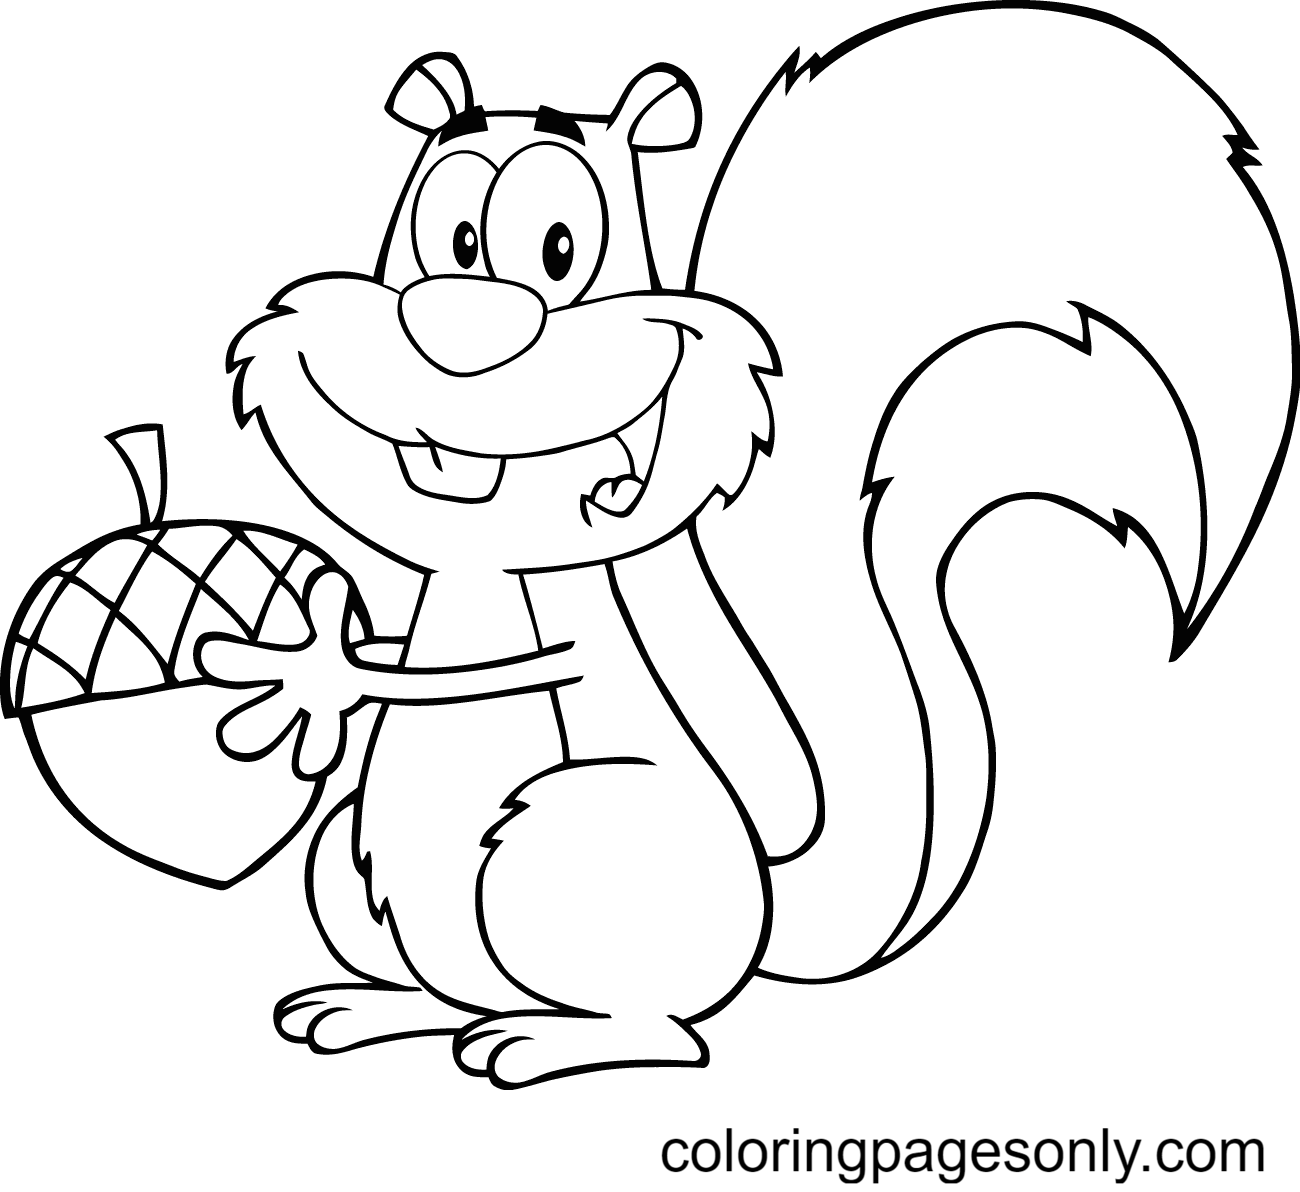 Cartoon Squirrel Holding An Acorn Coloring Page